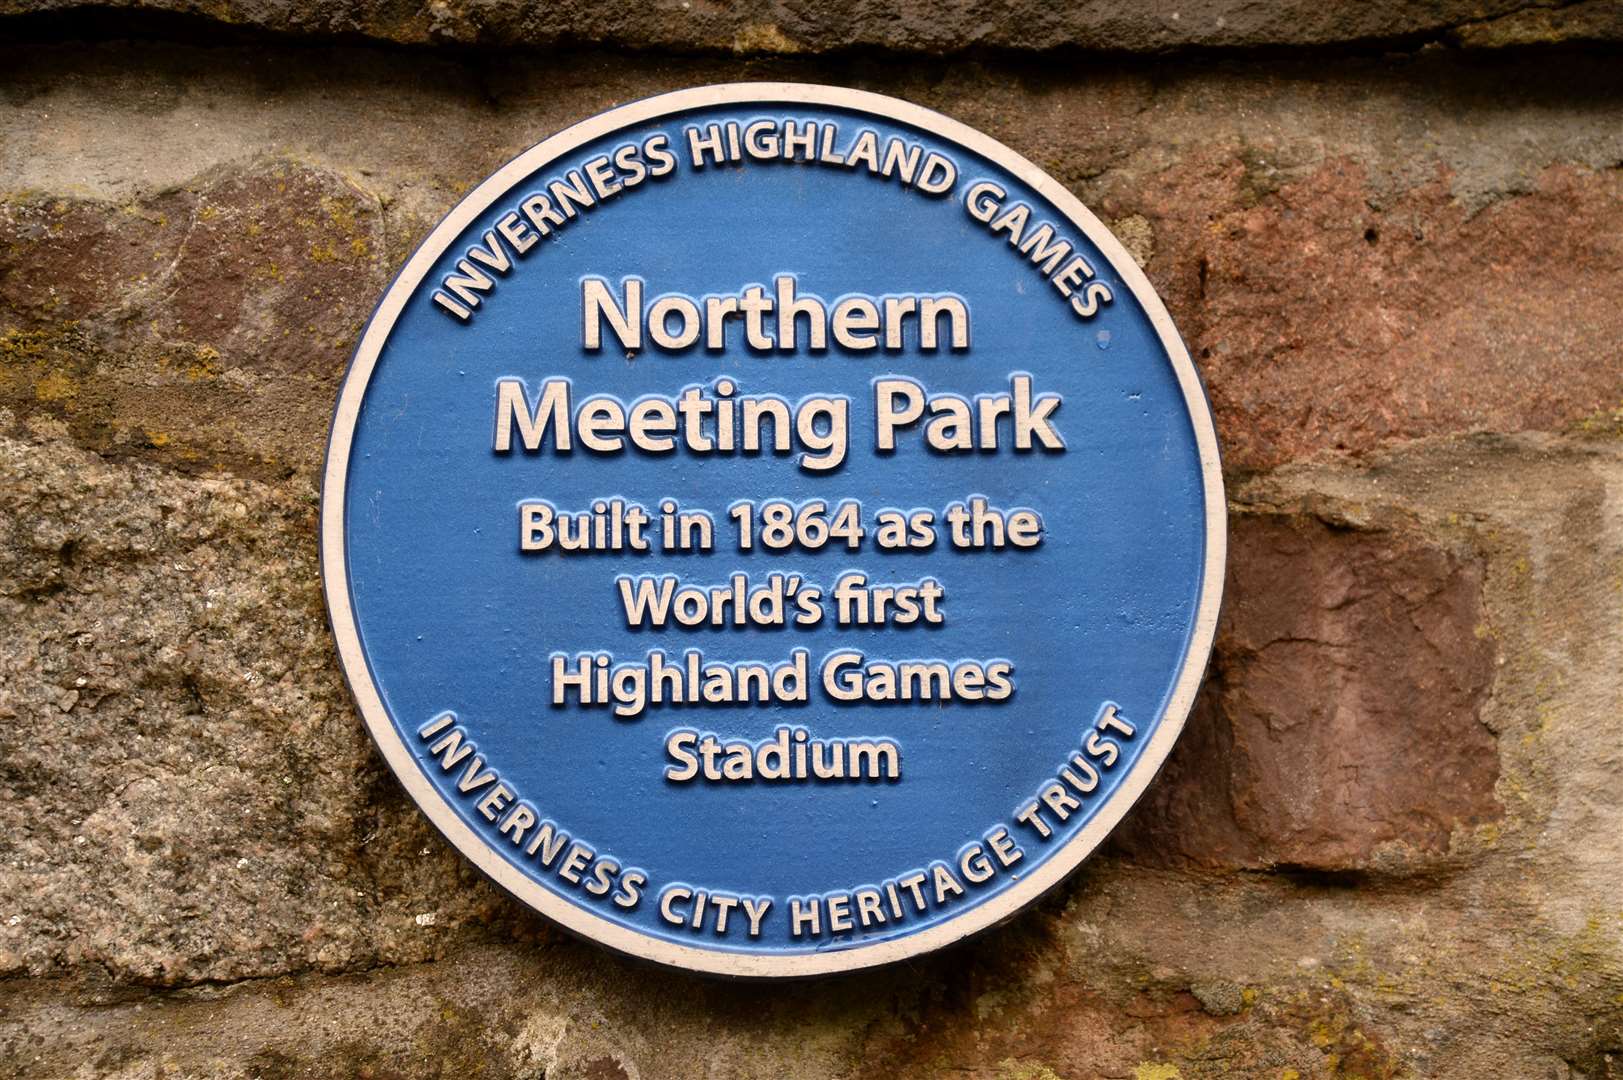 The work will help to protect the heritage of the Northern Meeting Park.